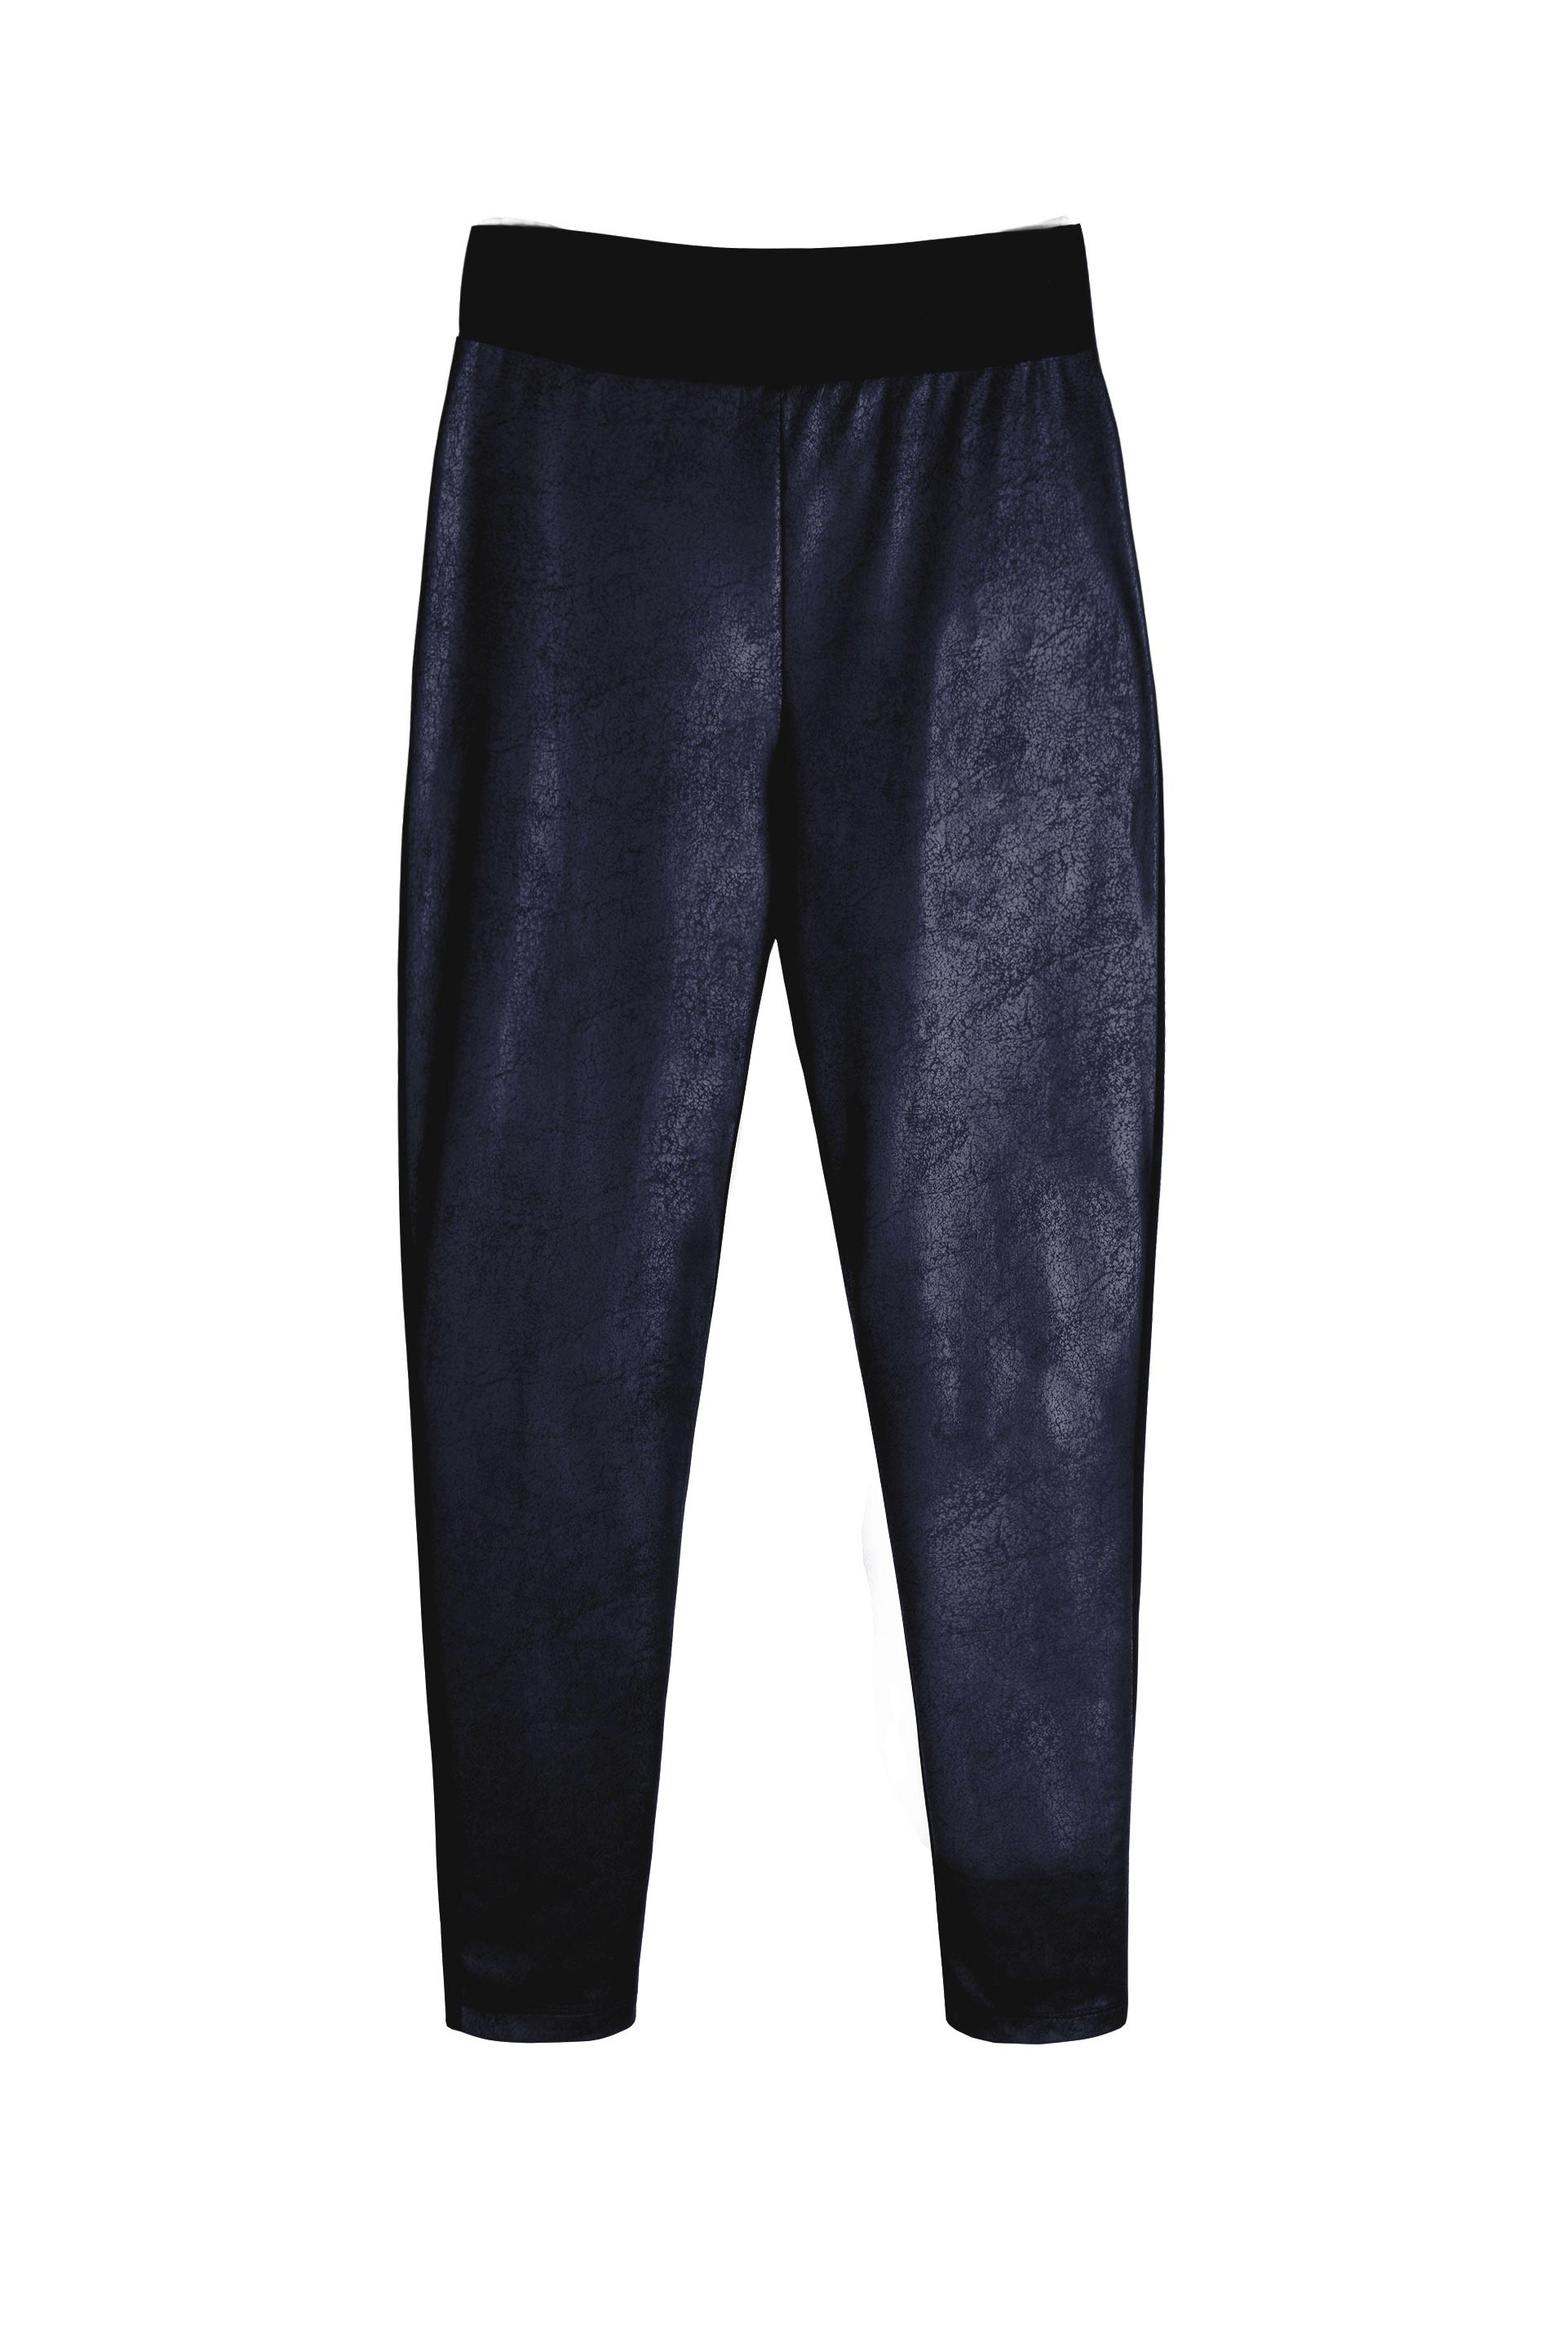 74117_sienna_trousers_sultry_navy.jpg